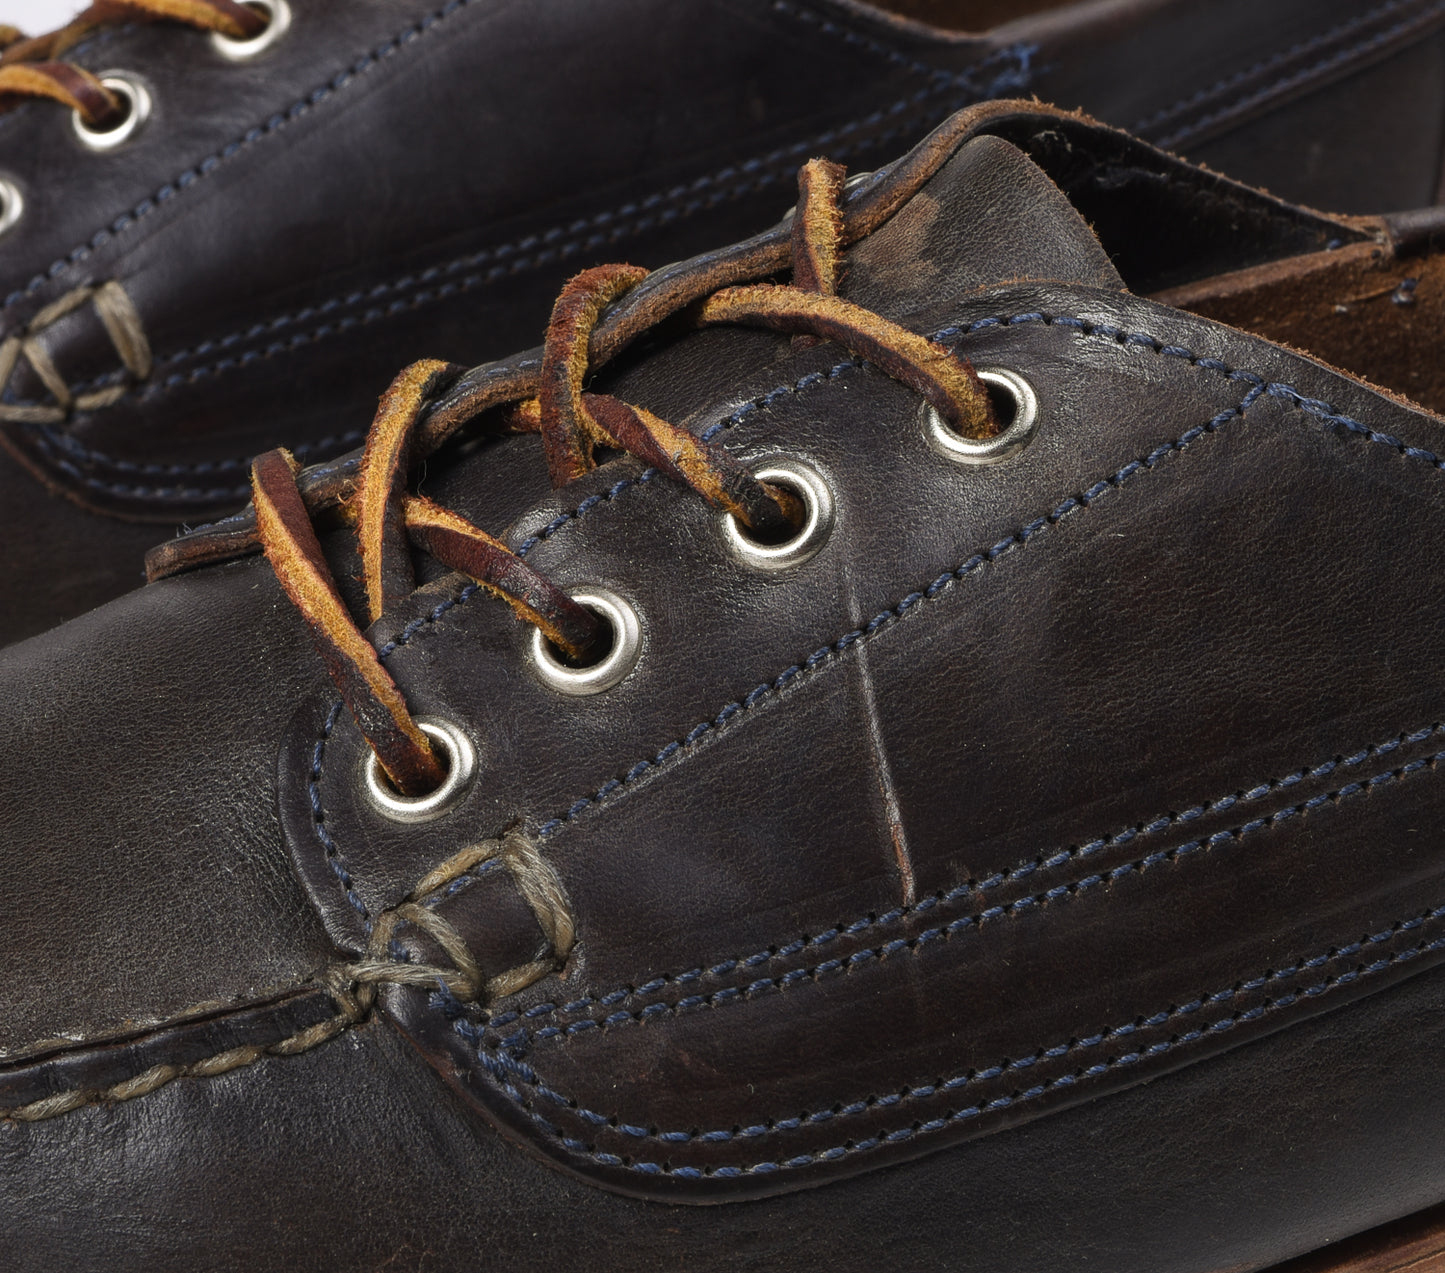 USED OAK STREET BOOTMAKERS TRAIL OXFORD  - NAVY